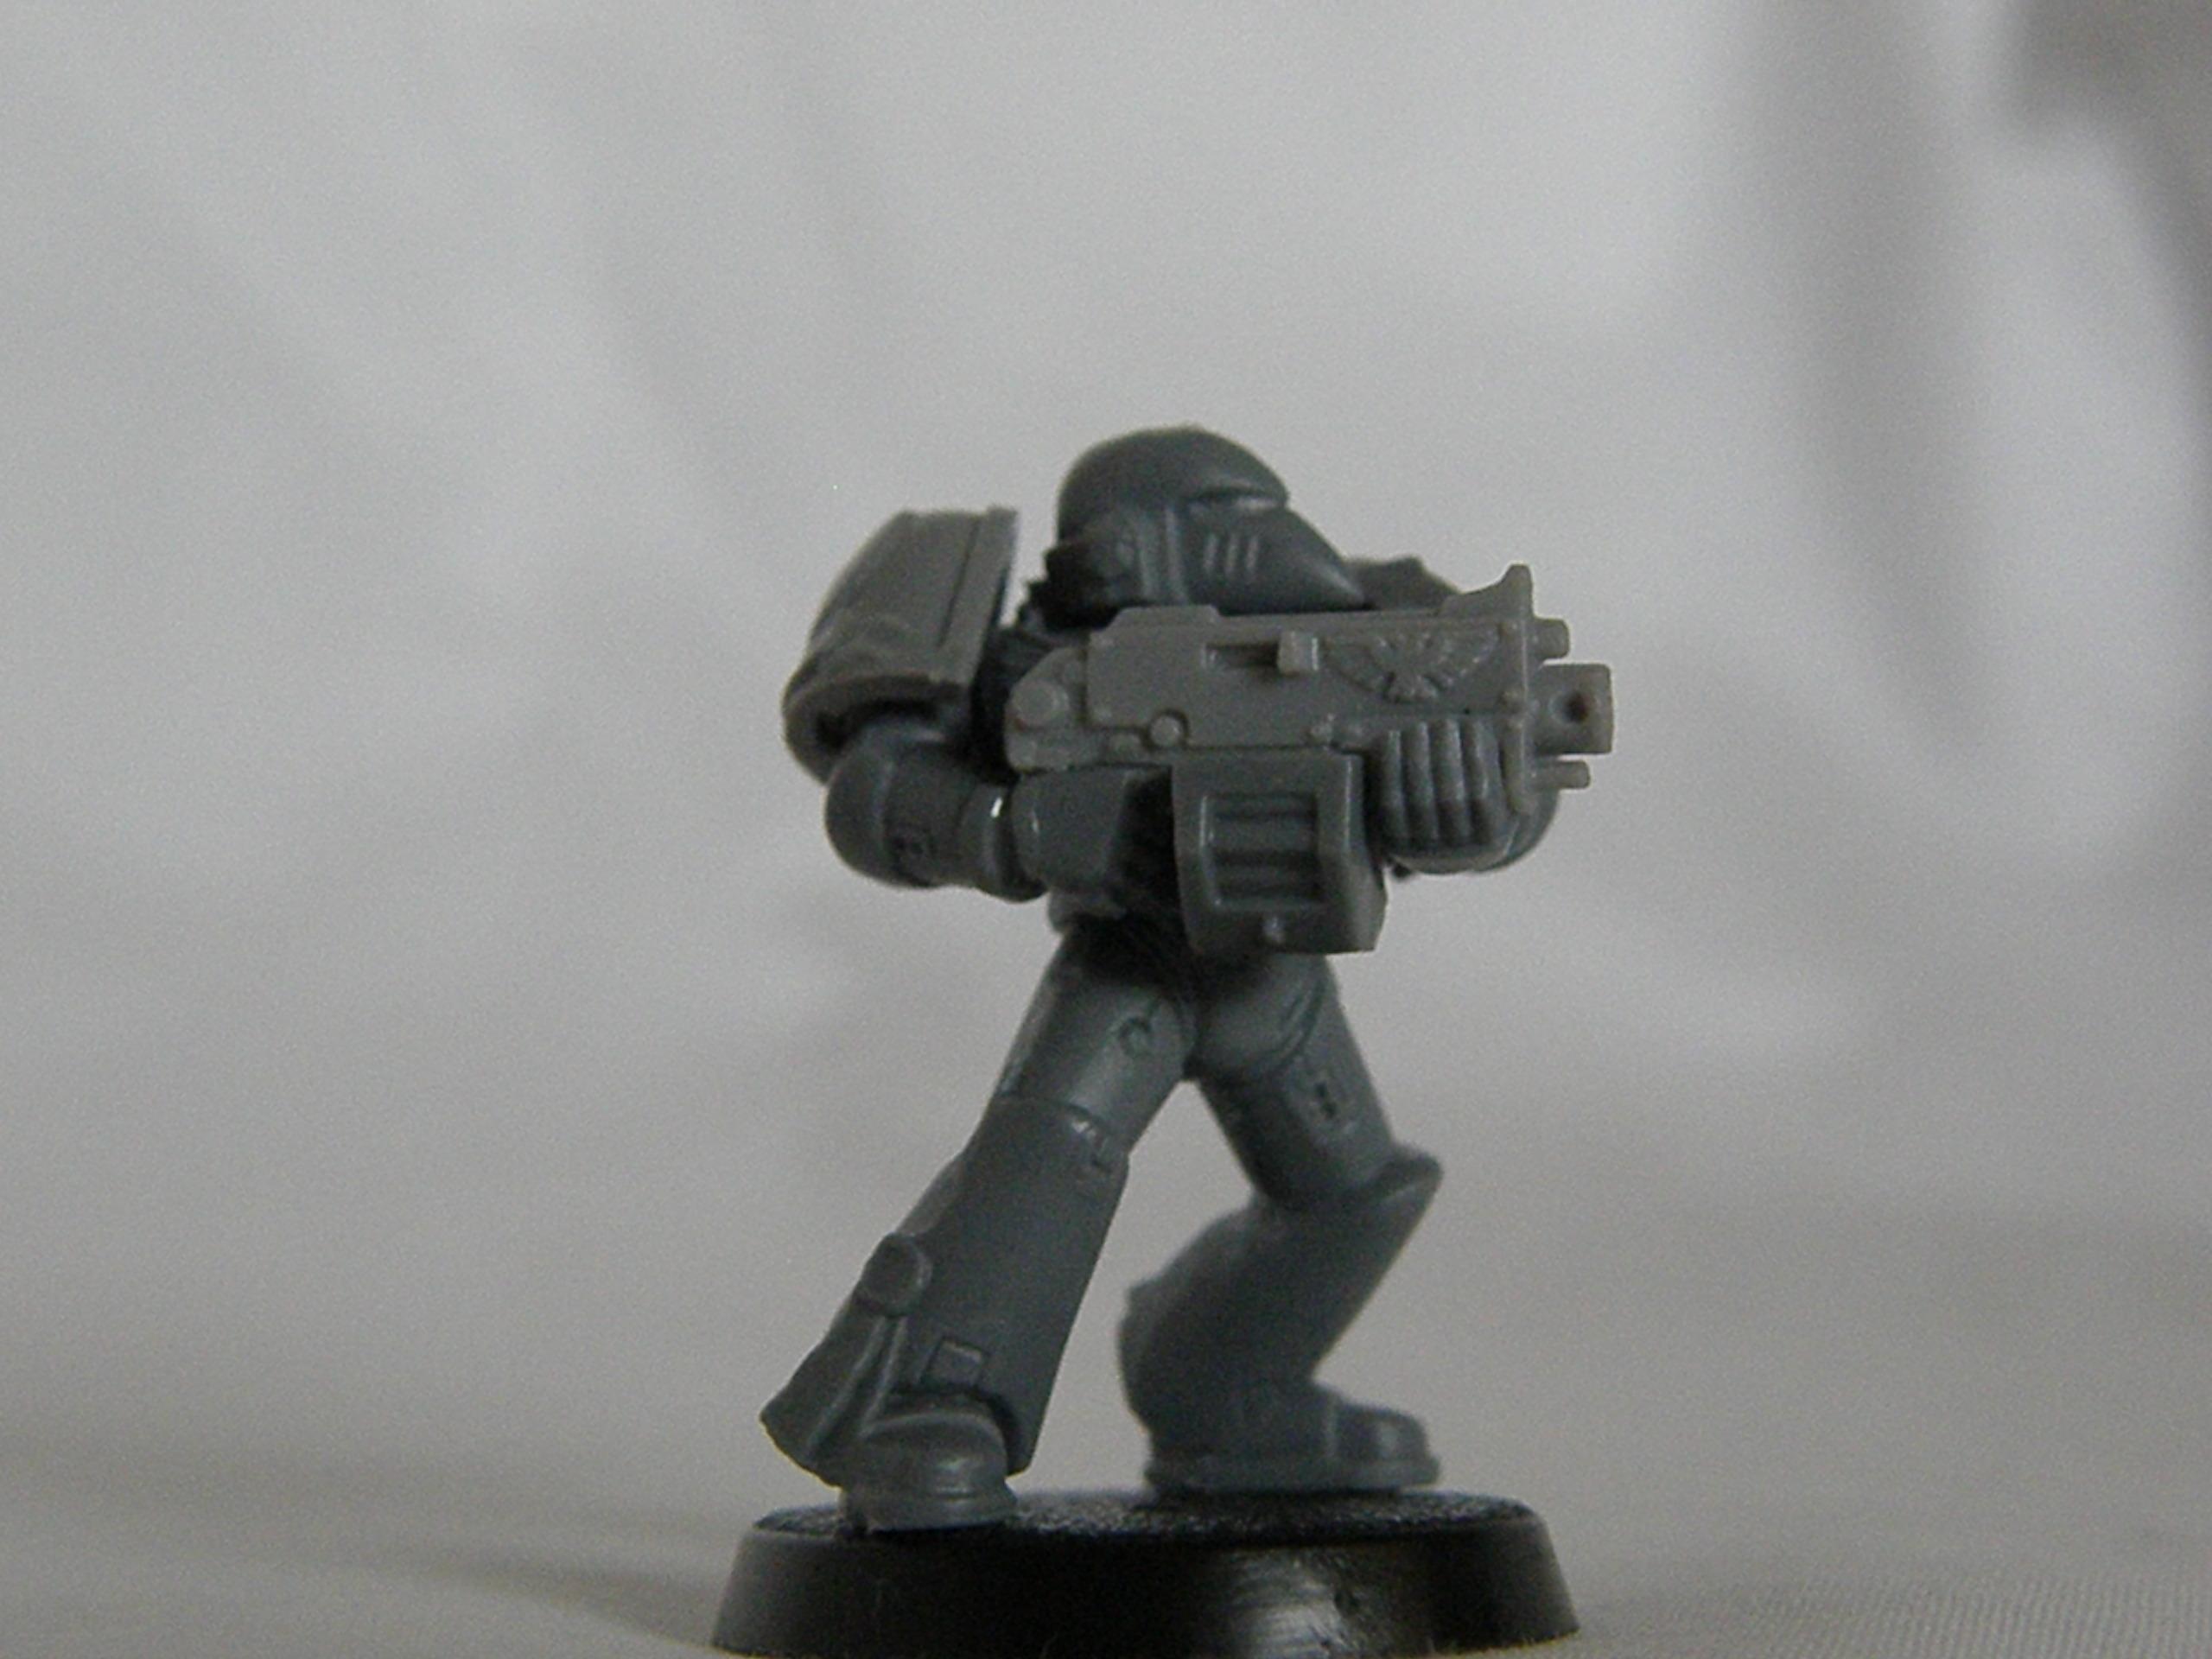 Ammo Feed, Bolter, Conversion, Space Marines, Sternguard, Unpainted, Veteran, Work In Progress